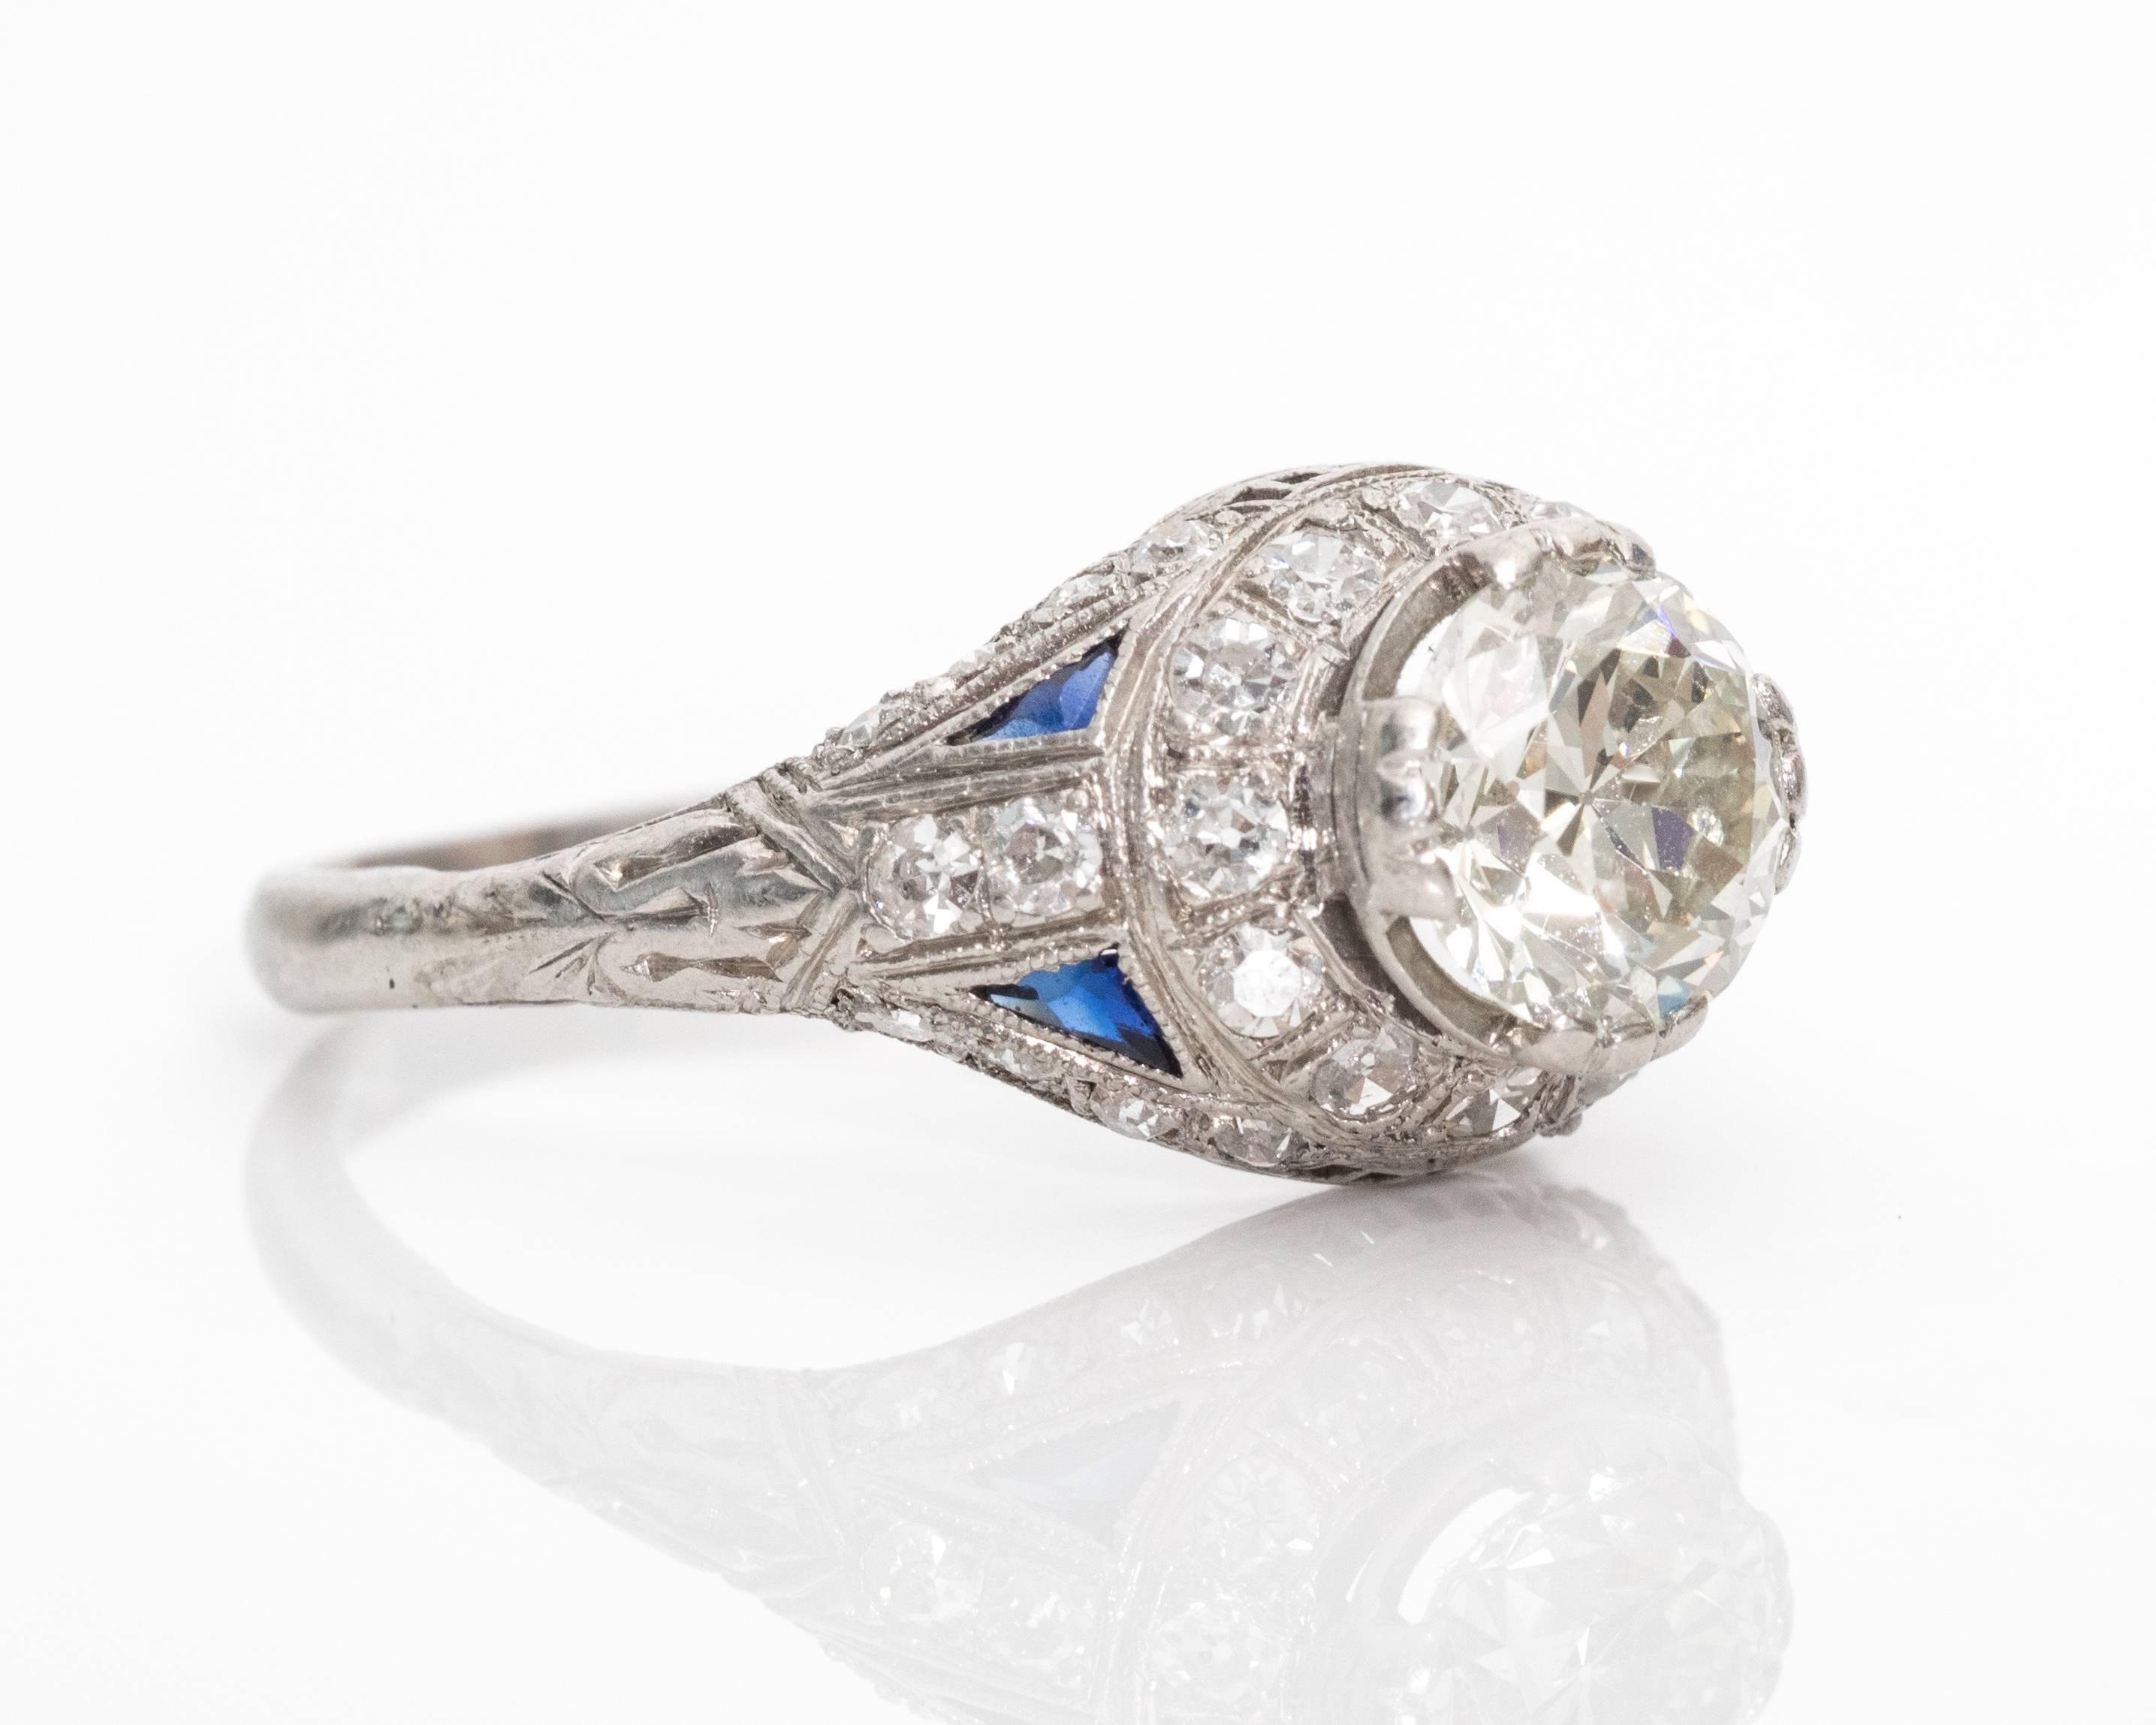 1900s Art Nouveau 1.35 Carat Diamond, Sapphire and Platinum Ring features Trillion Cut Blue Sapphire Accents . The classic cathedral mount is covered in dazzling diamonds all around. The center stone is 1.35 carat with a slight yellow tinge from the